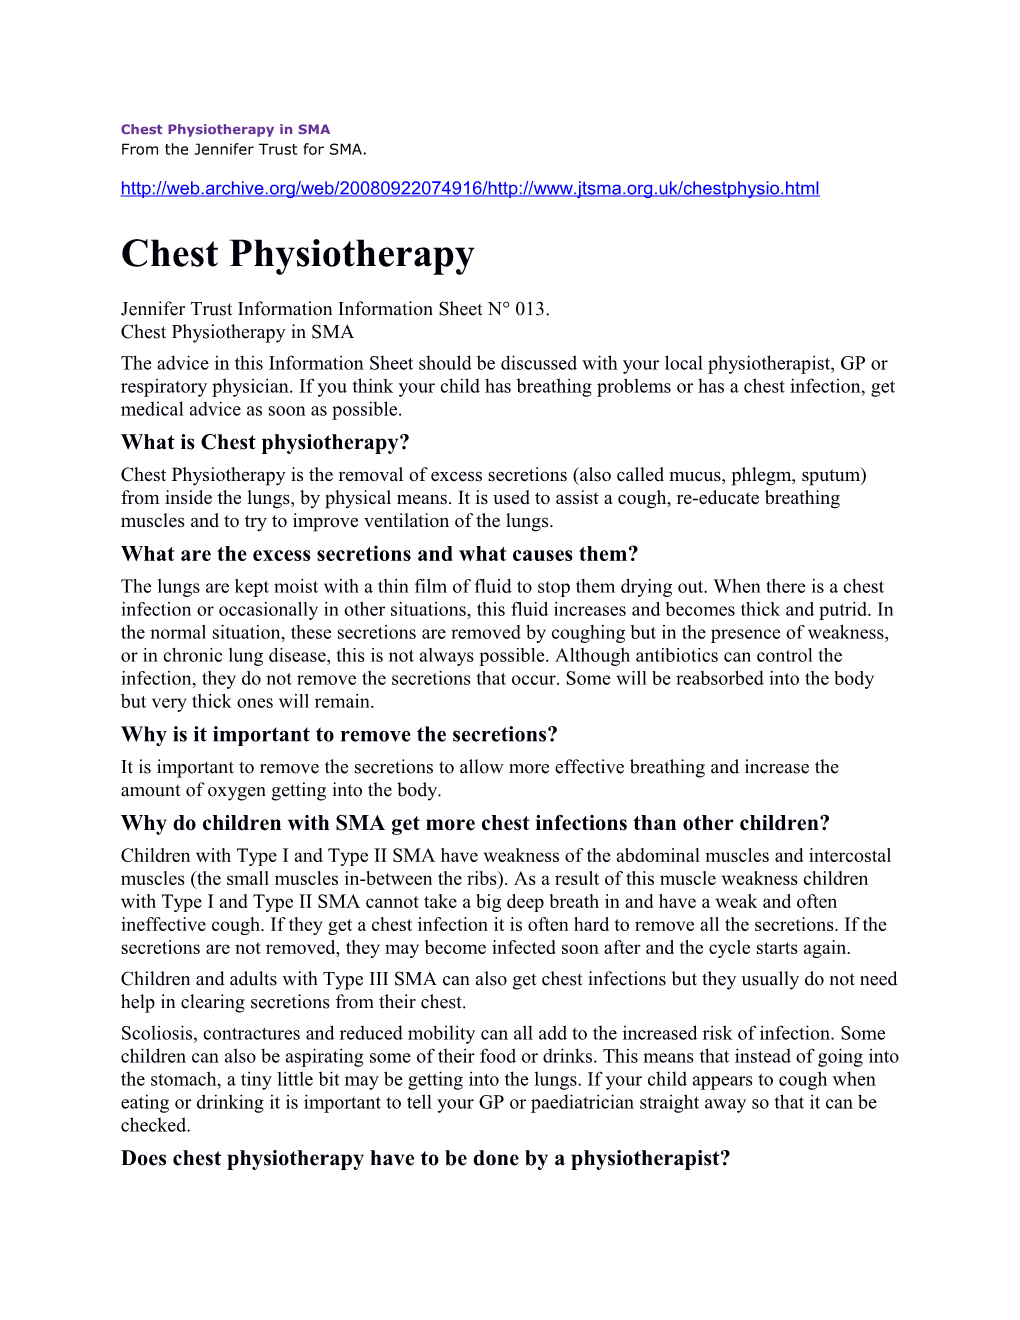 Chest Physiotherapy in SMA from the Jennifer Trust for SMA